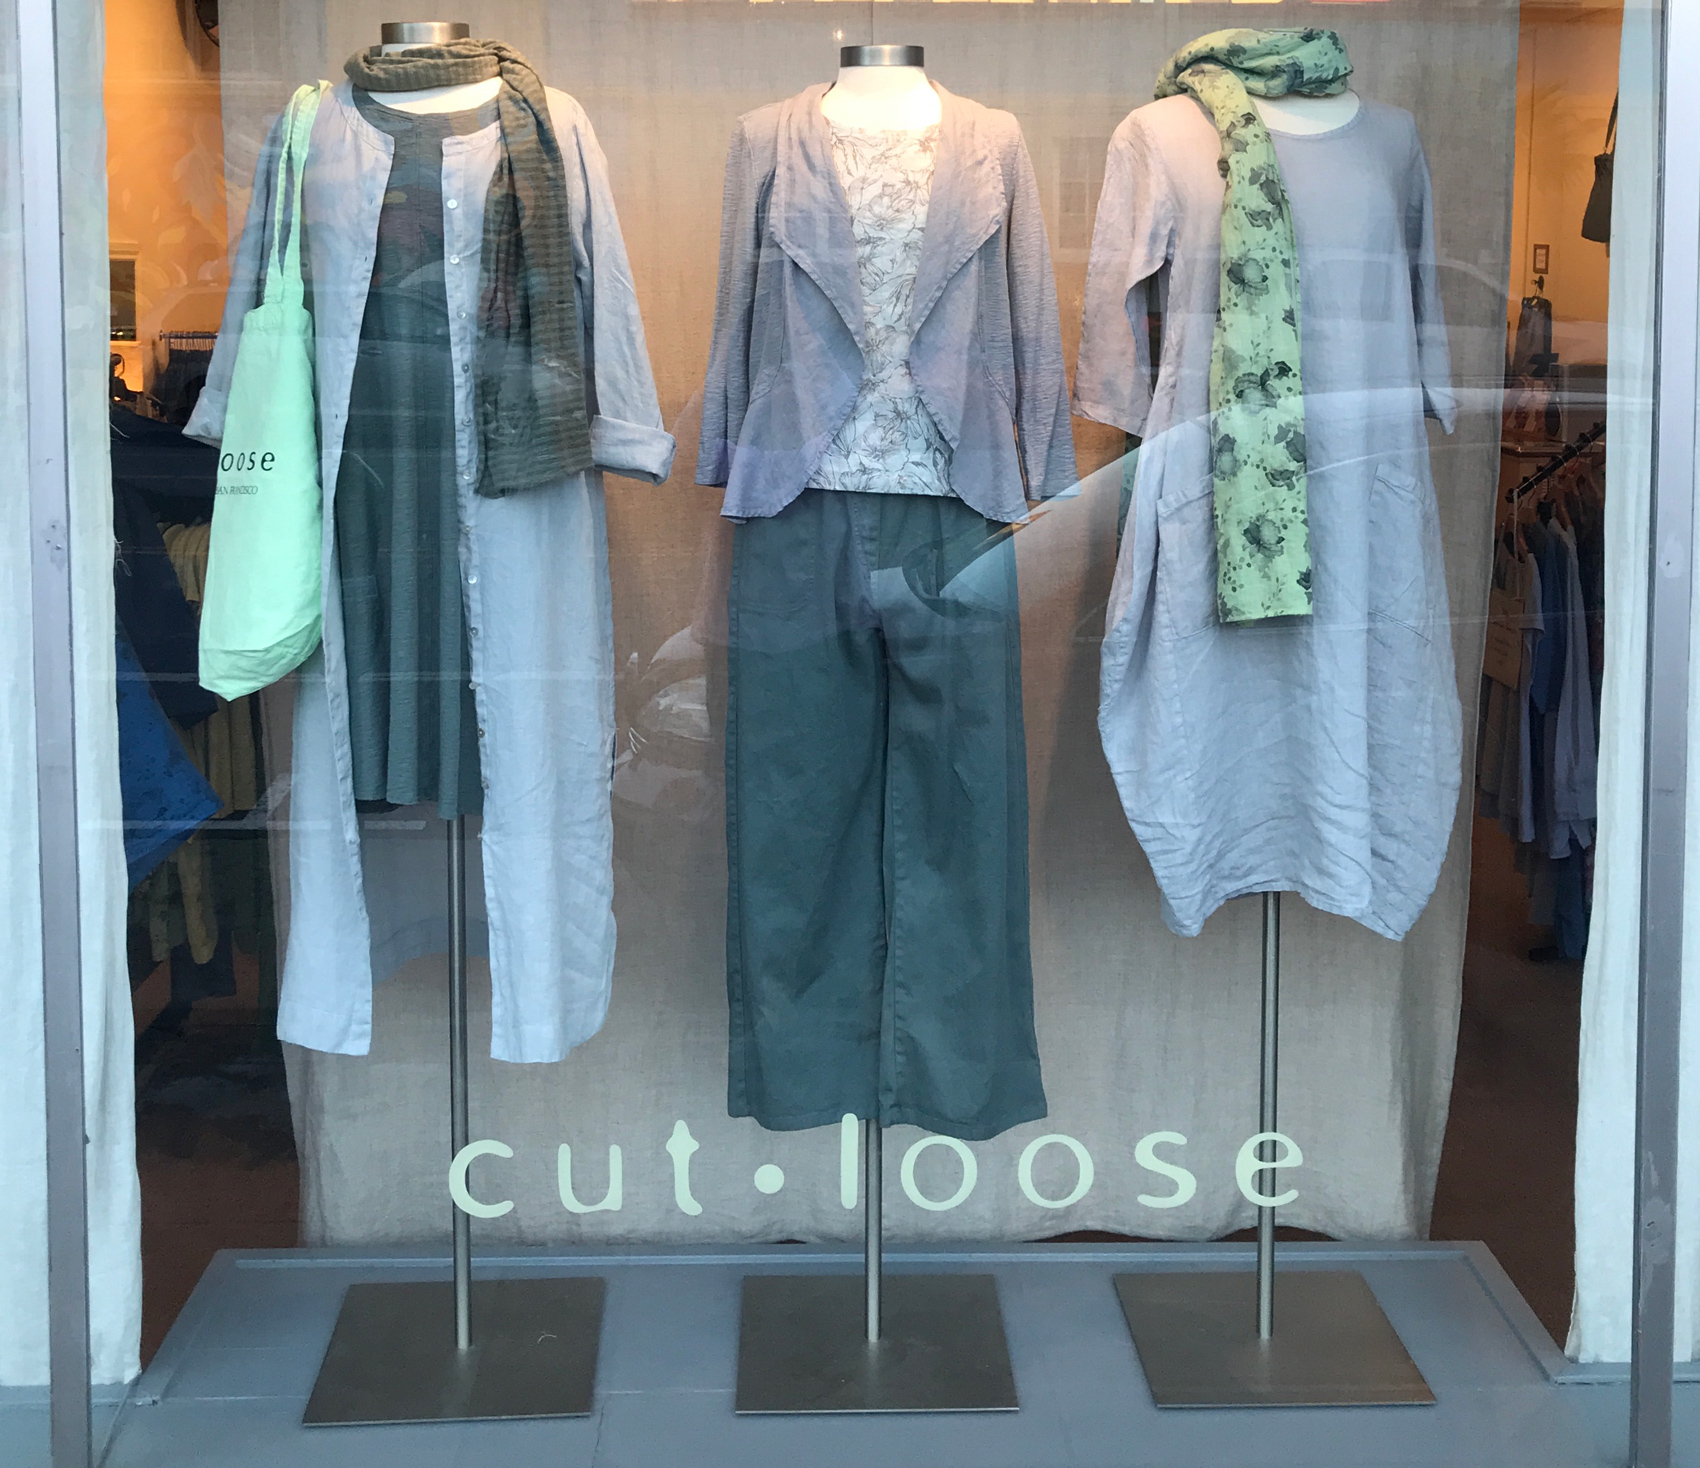 Cut Loose Clothing Sale - In Stock or Special Order - Free